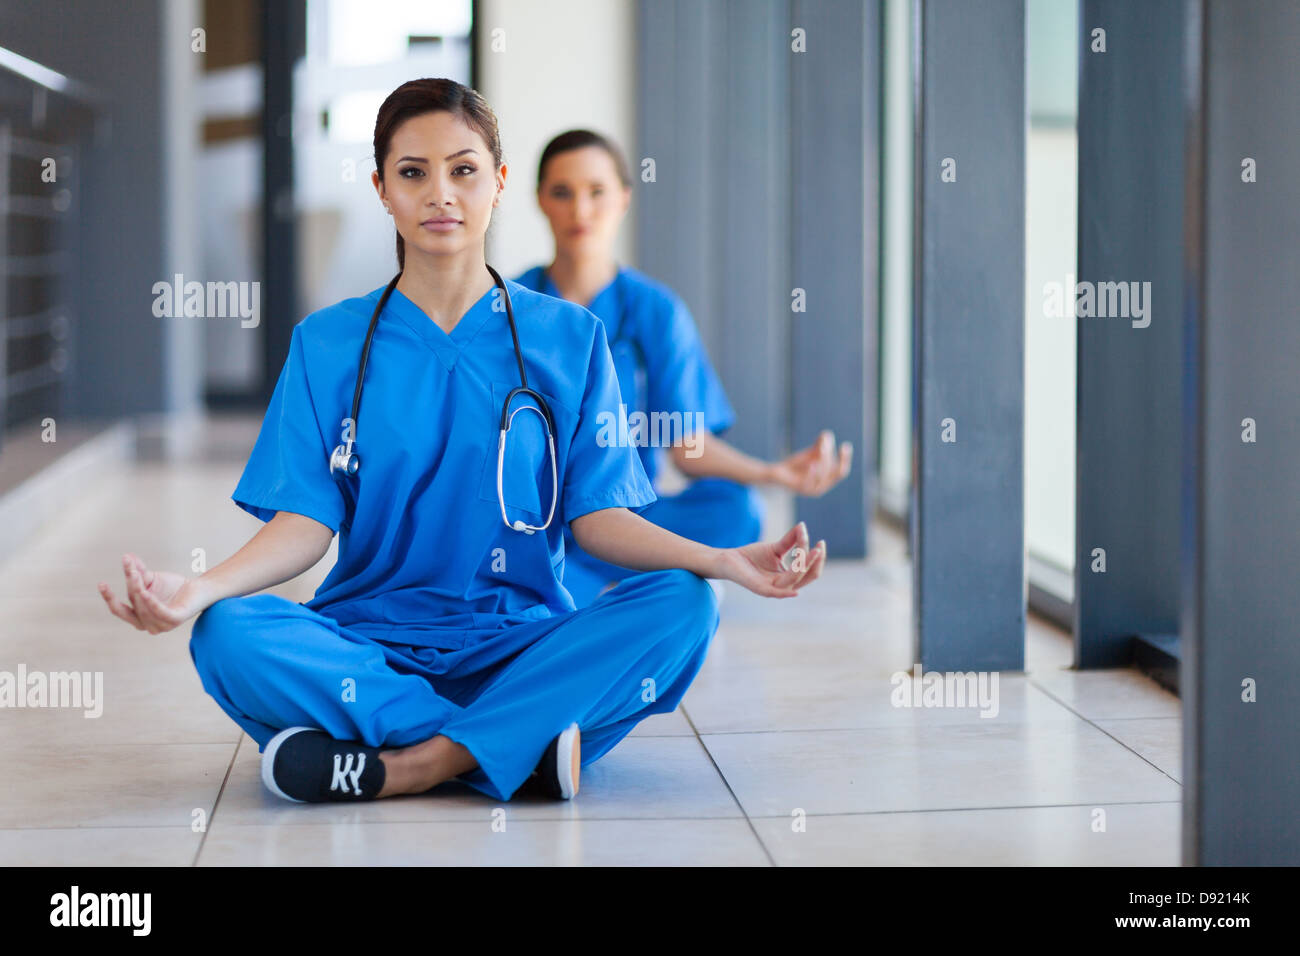 two young healthcare workers meditation during break to release work pressure Stock Photo